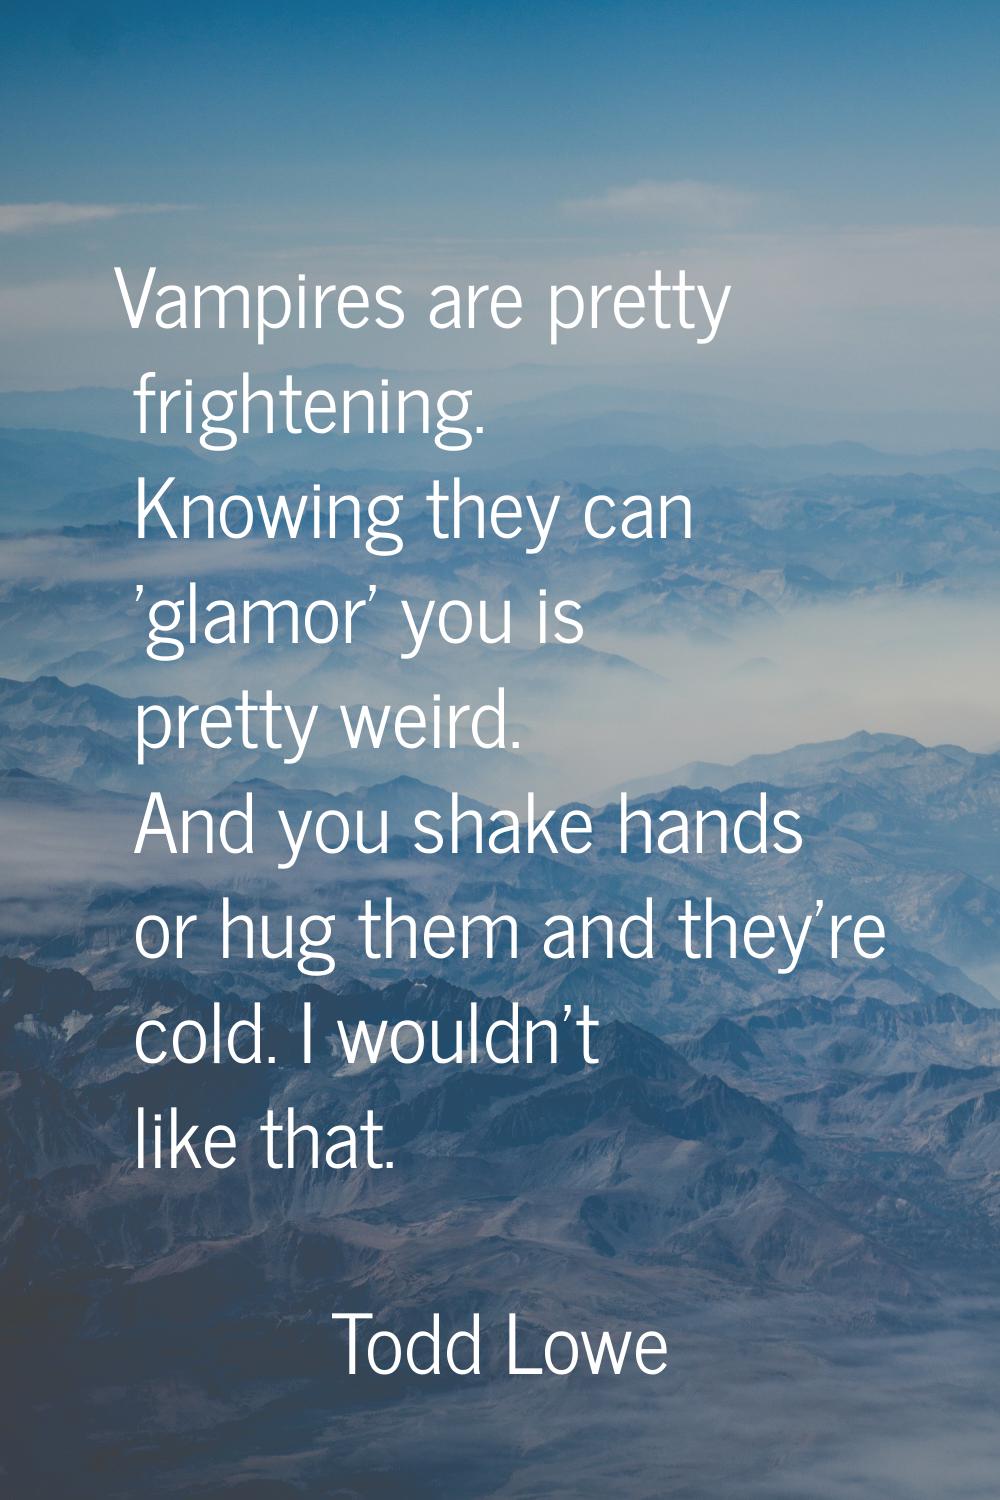 Vampires are pretty frightening. Knowing they can 'glamor' you is pretty weird. And you shake hands